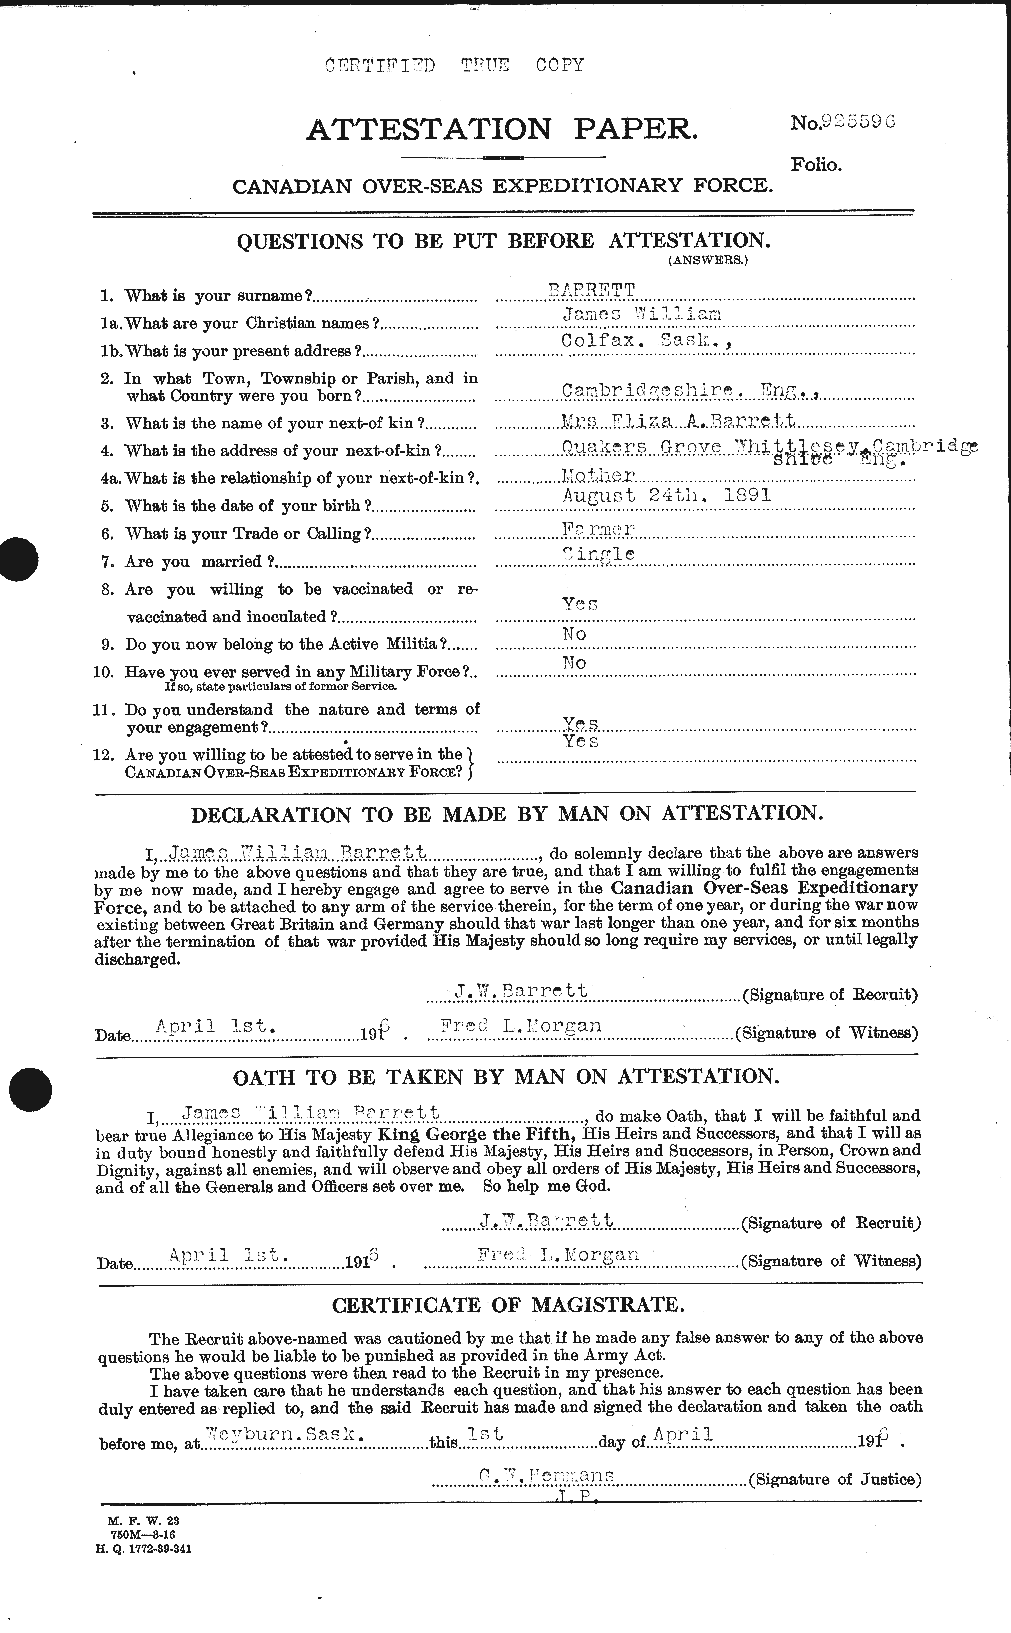 Personnel Records of the First World War - CEF 220258a